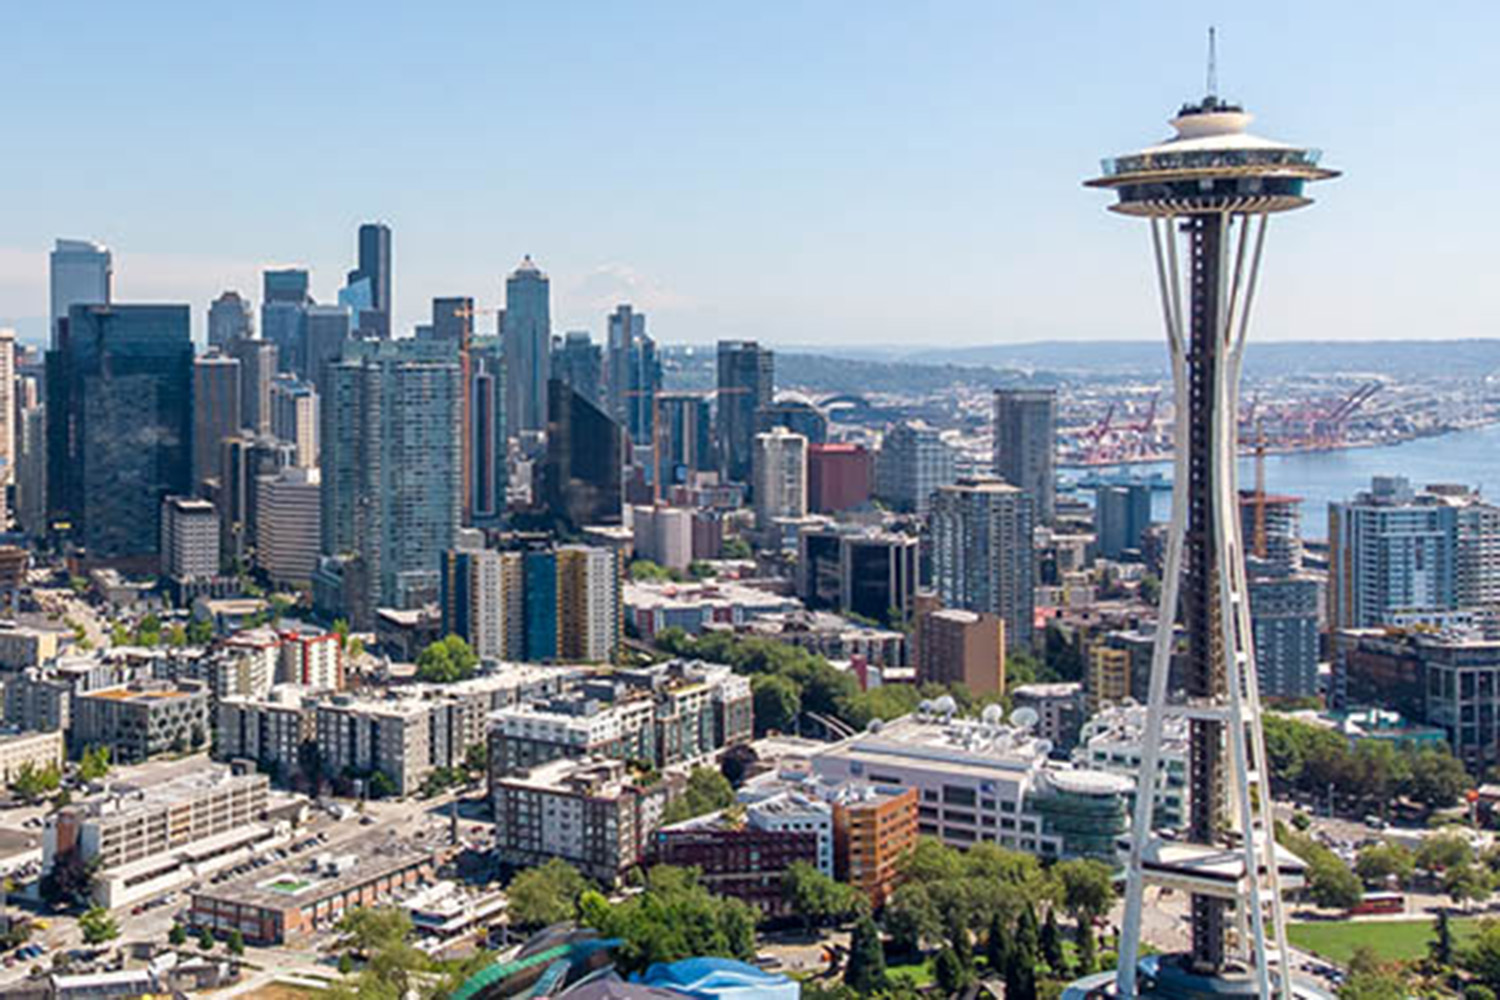 An image of the Seattle city skyline featuring the Space Needle